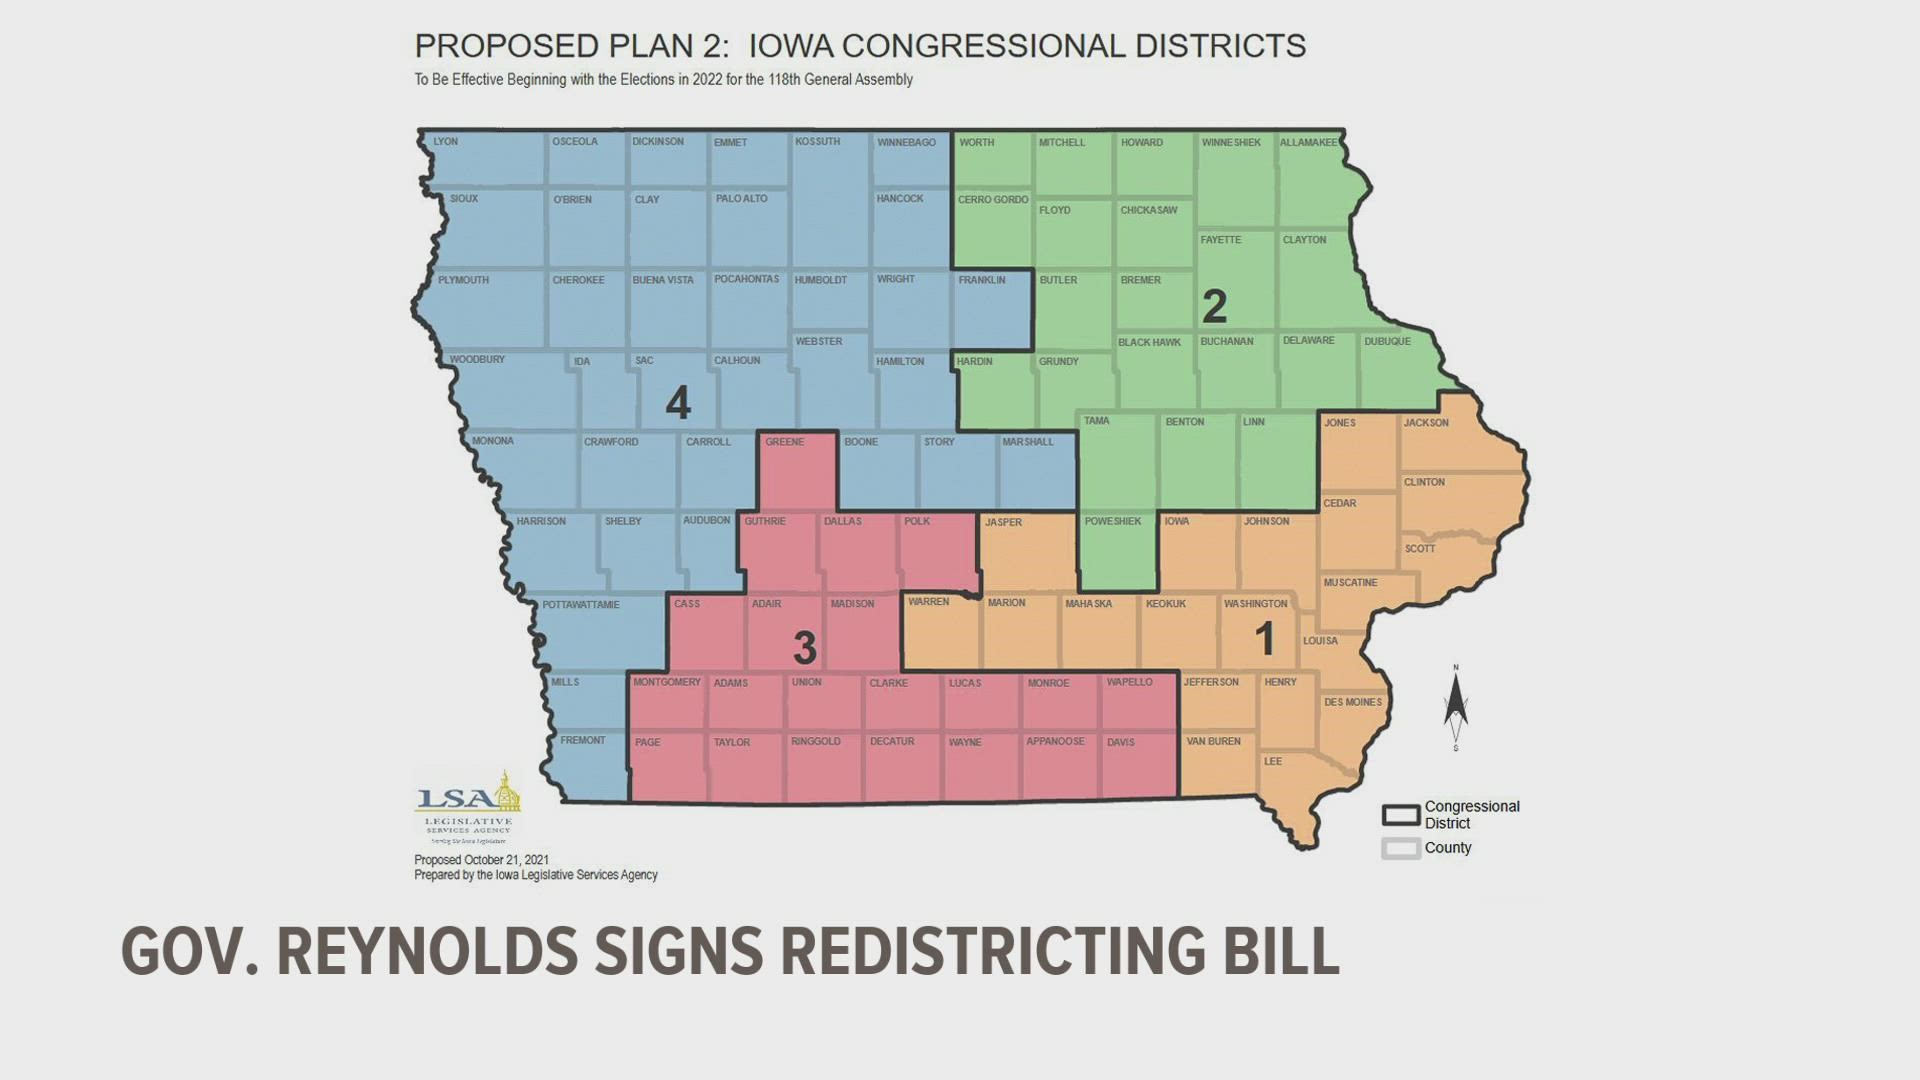 Iowa lawmakers gave the OK on the second draft of maps last week.